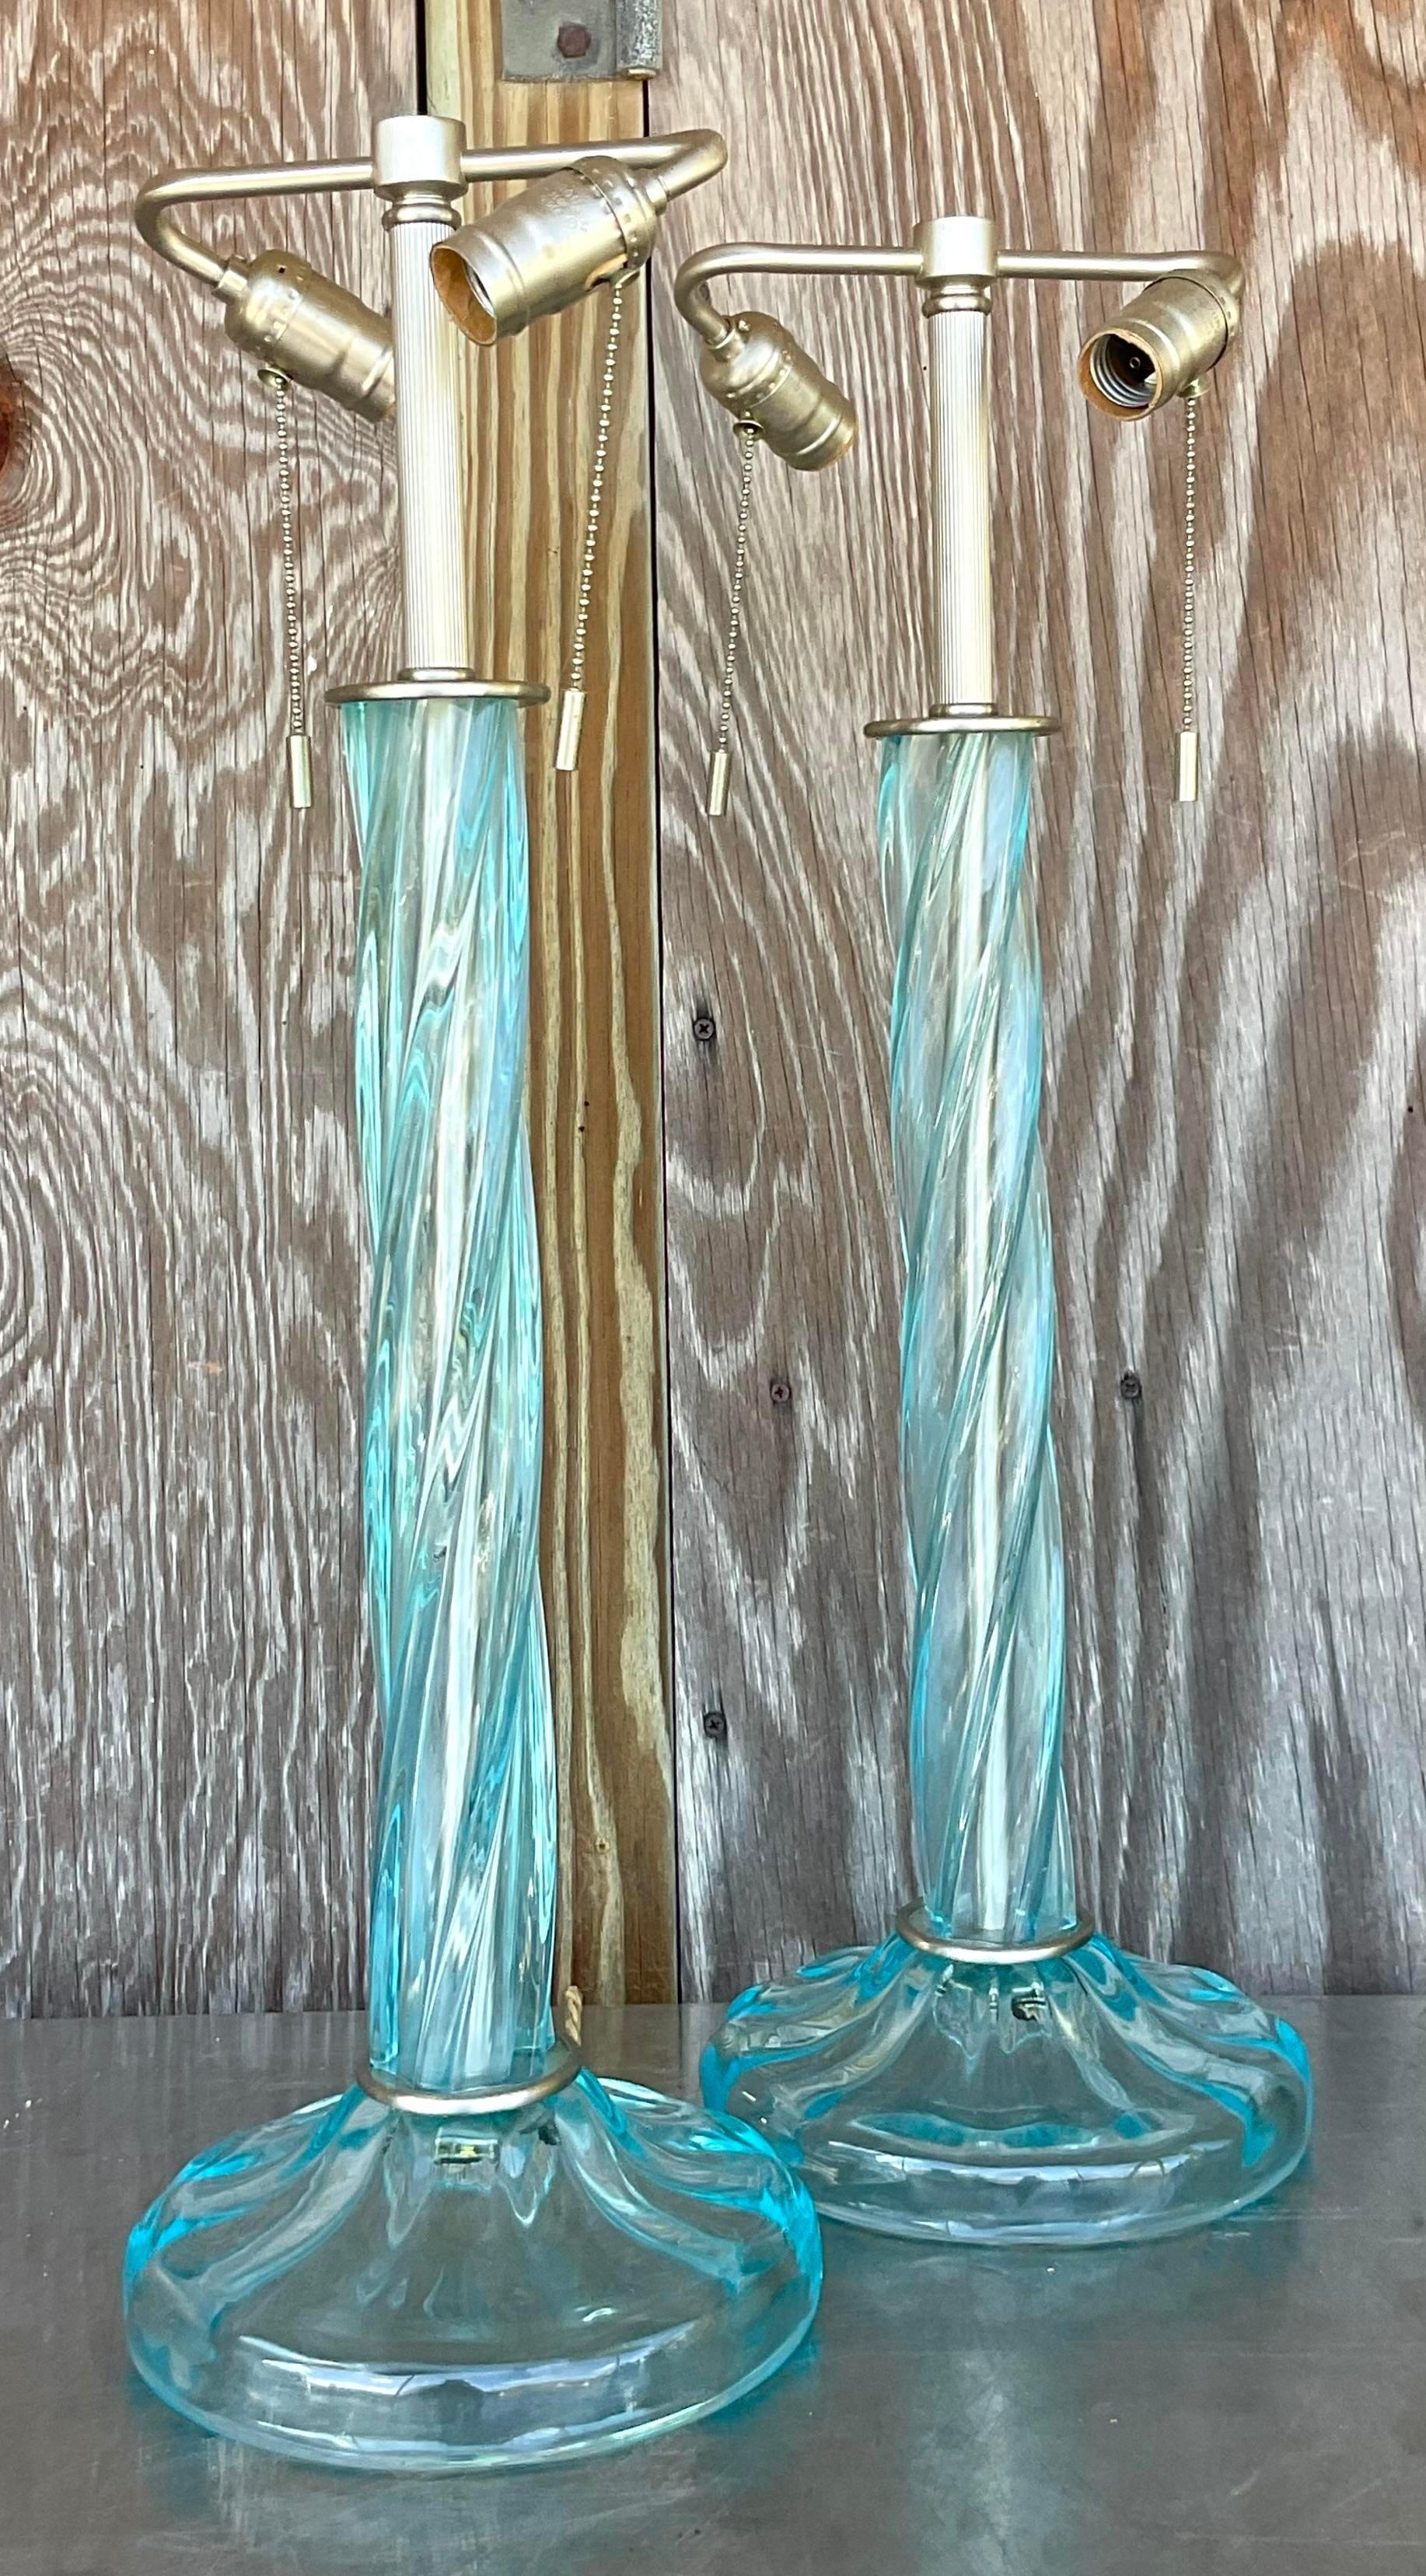 American Vintage Boho Signed Donghia Twist Blown Glass Lamps - a Pair For Sale